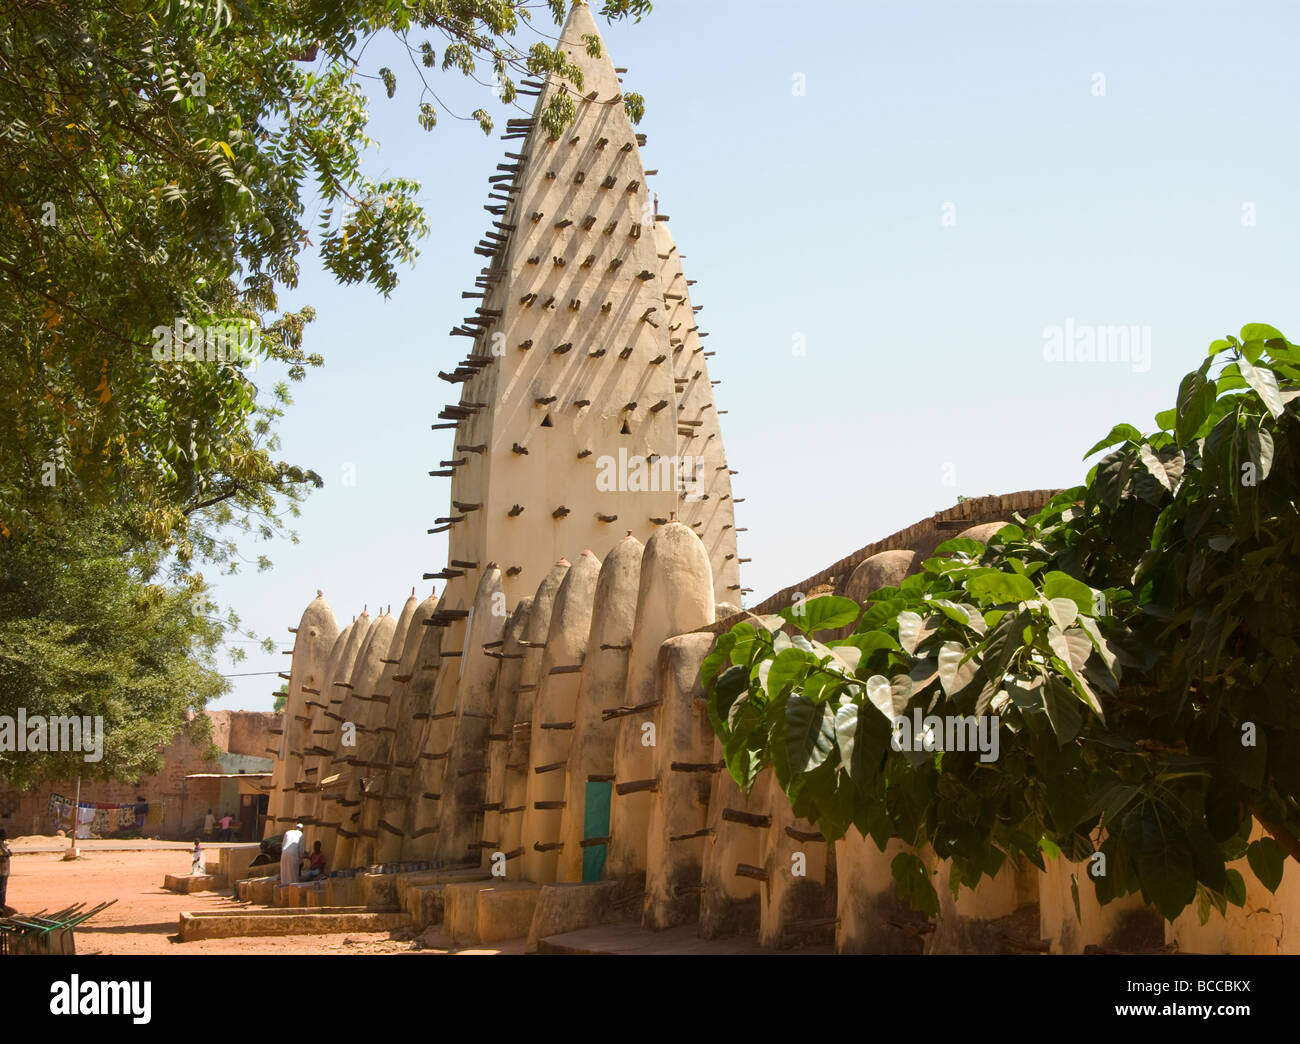 Burkina Faso. Sahel. Great mosque of Bobo-Dioulasso. Sudanese style architecture built in adobe. Stock Photo